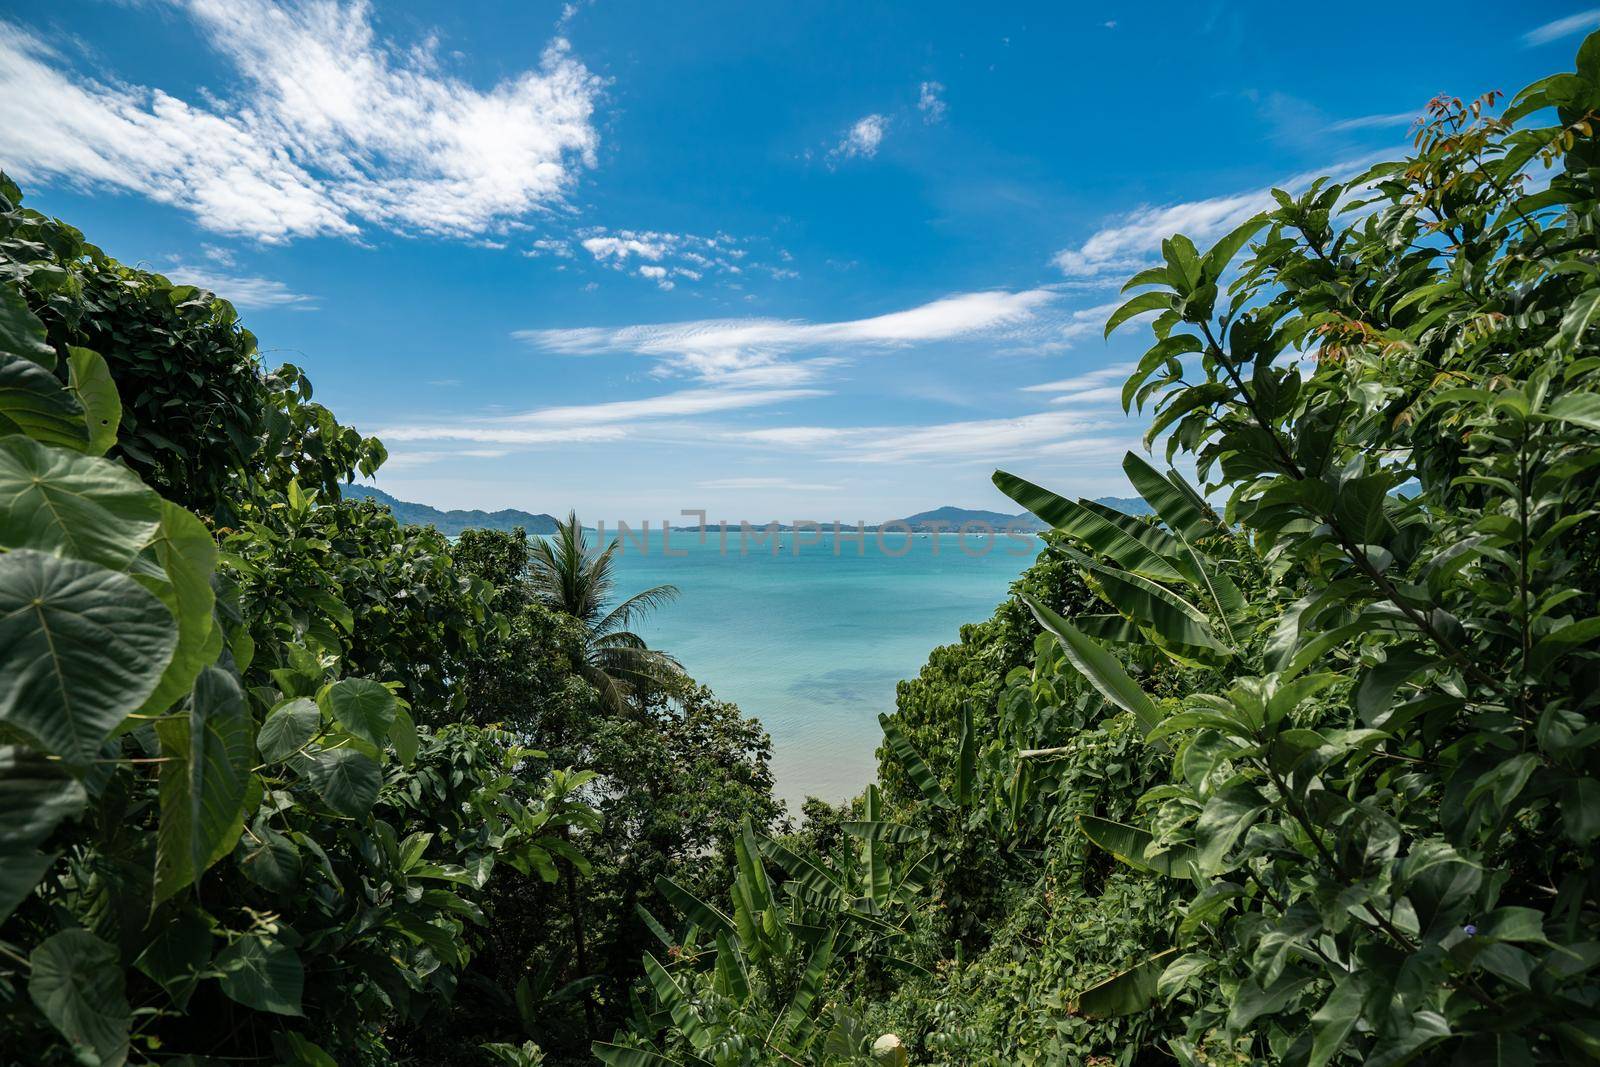 Tropical island with green trees on the foreground and beach, Phuket, Thailand.